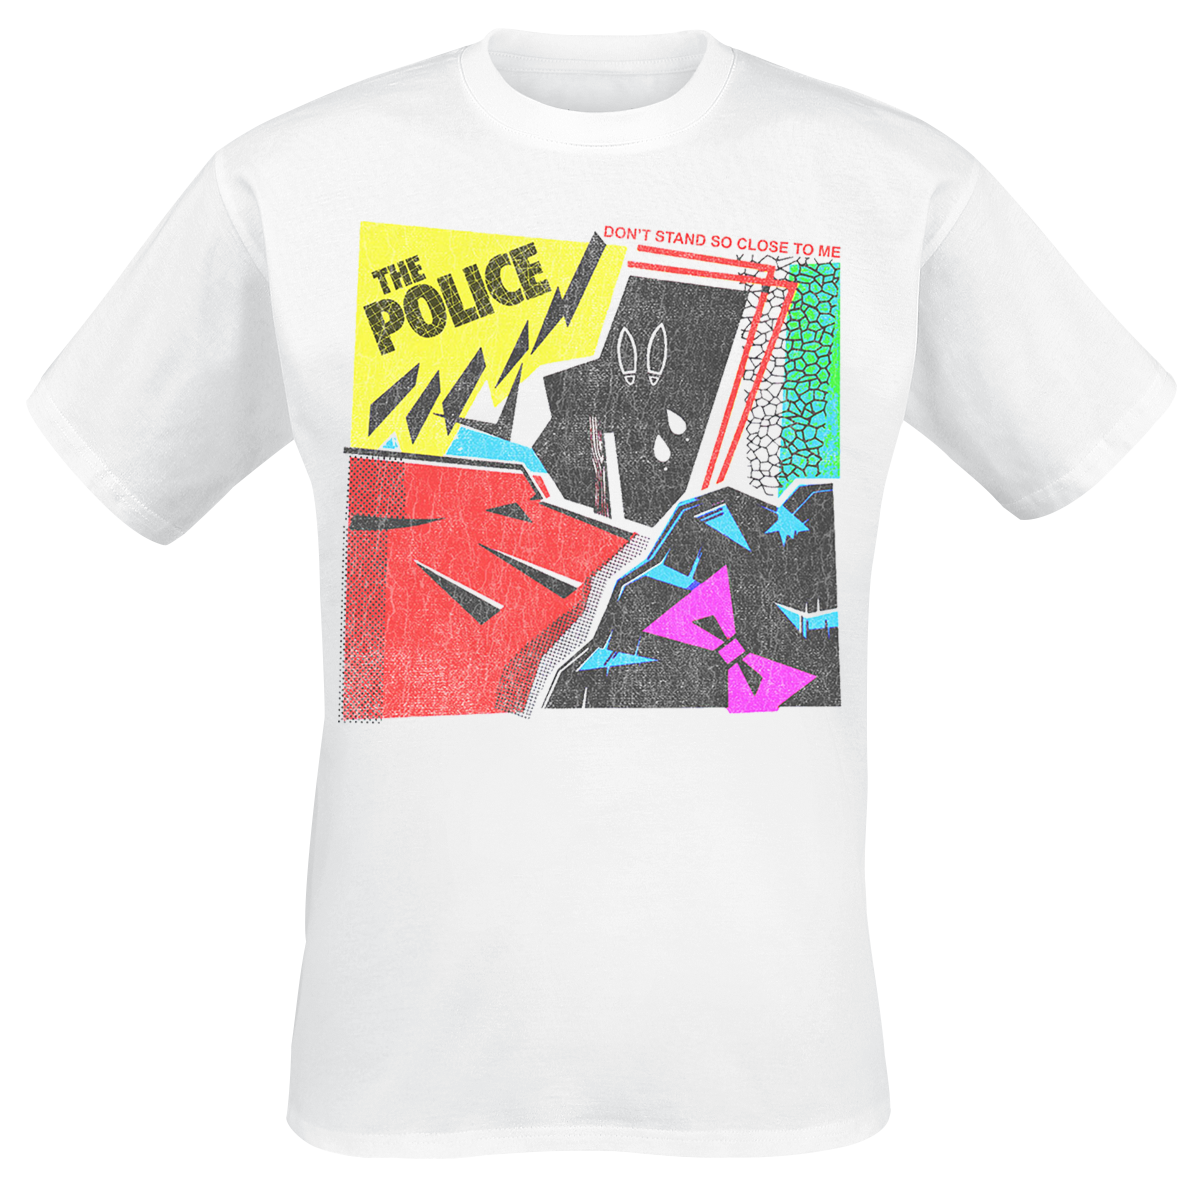 The Police - Don't Stand So Close To Me - T-Shirt - white image